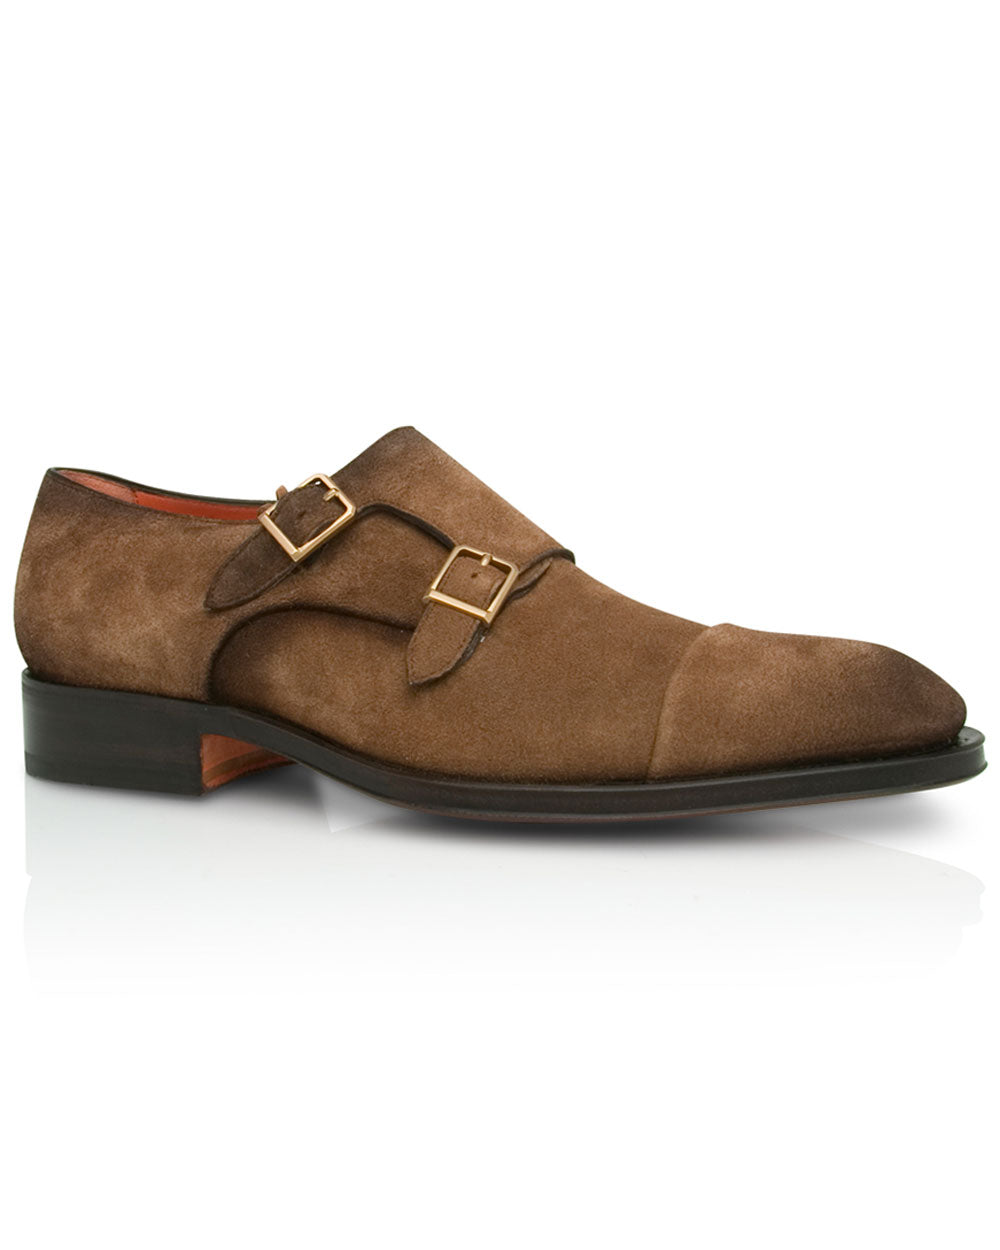 Divot Double Monk Strap Loafer in Dark Brown